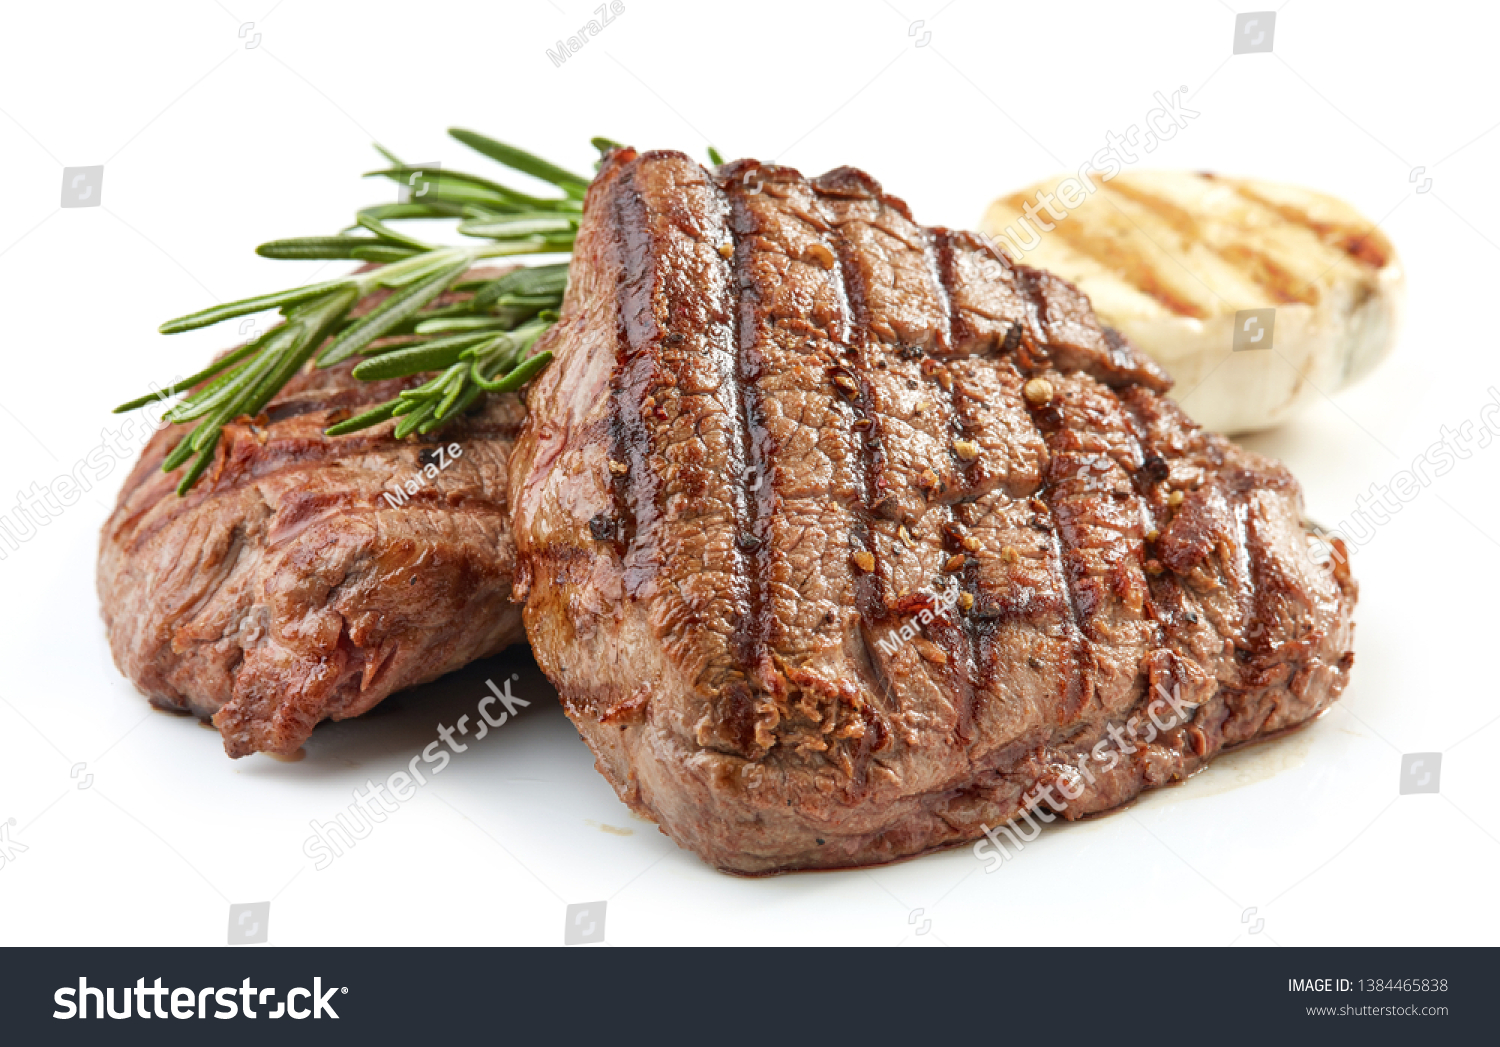 grilled beef fillet steak meat isolated on white background #1384465838